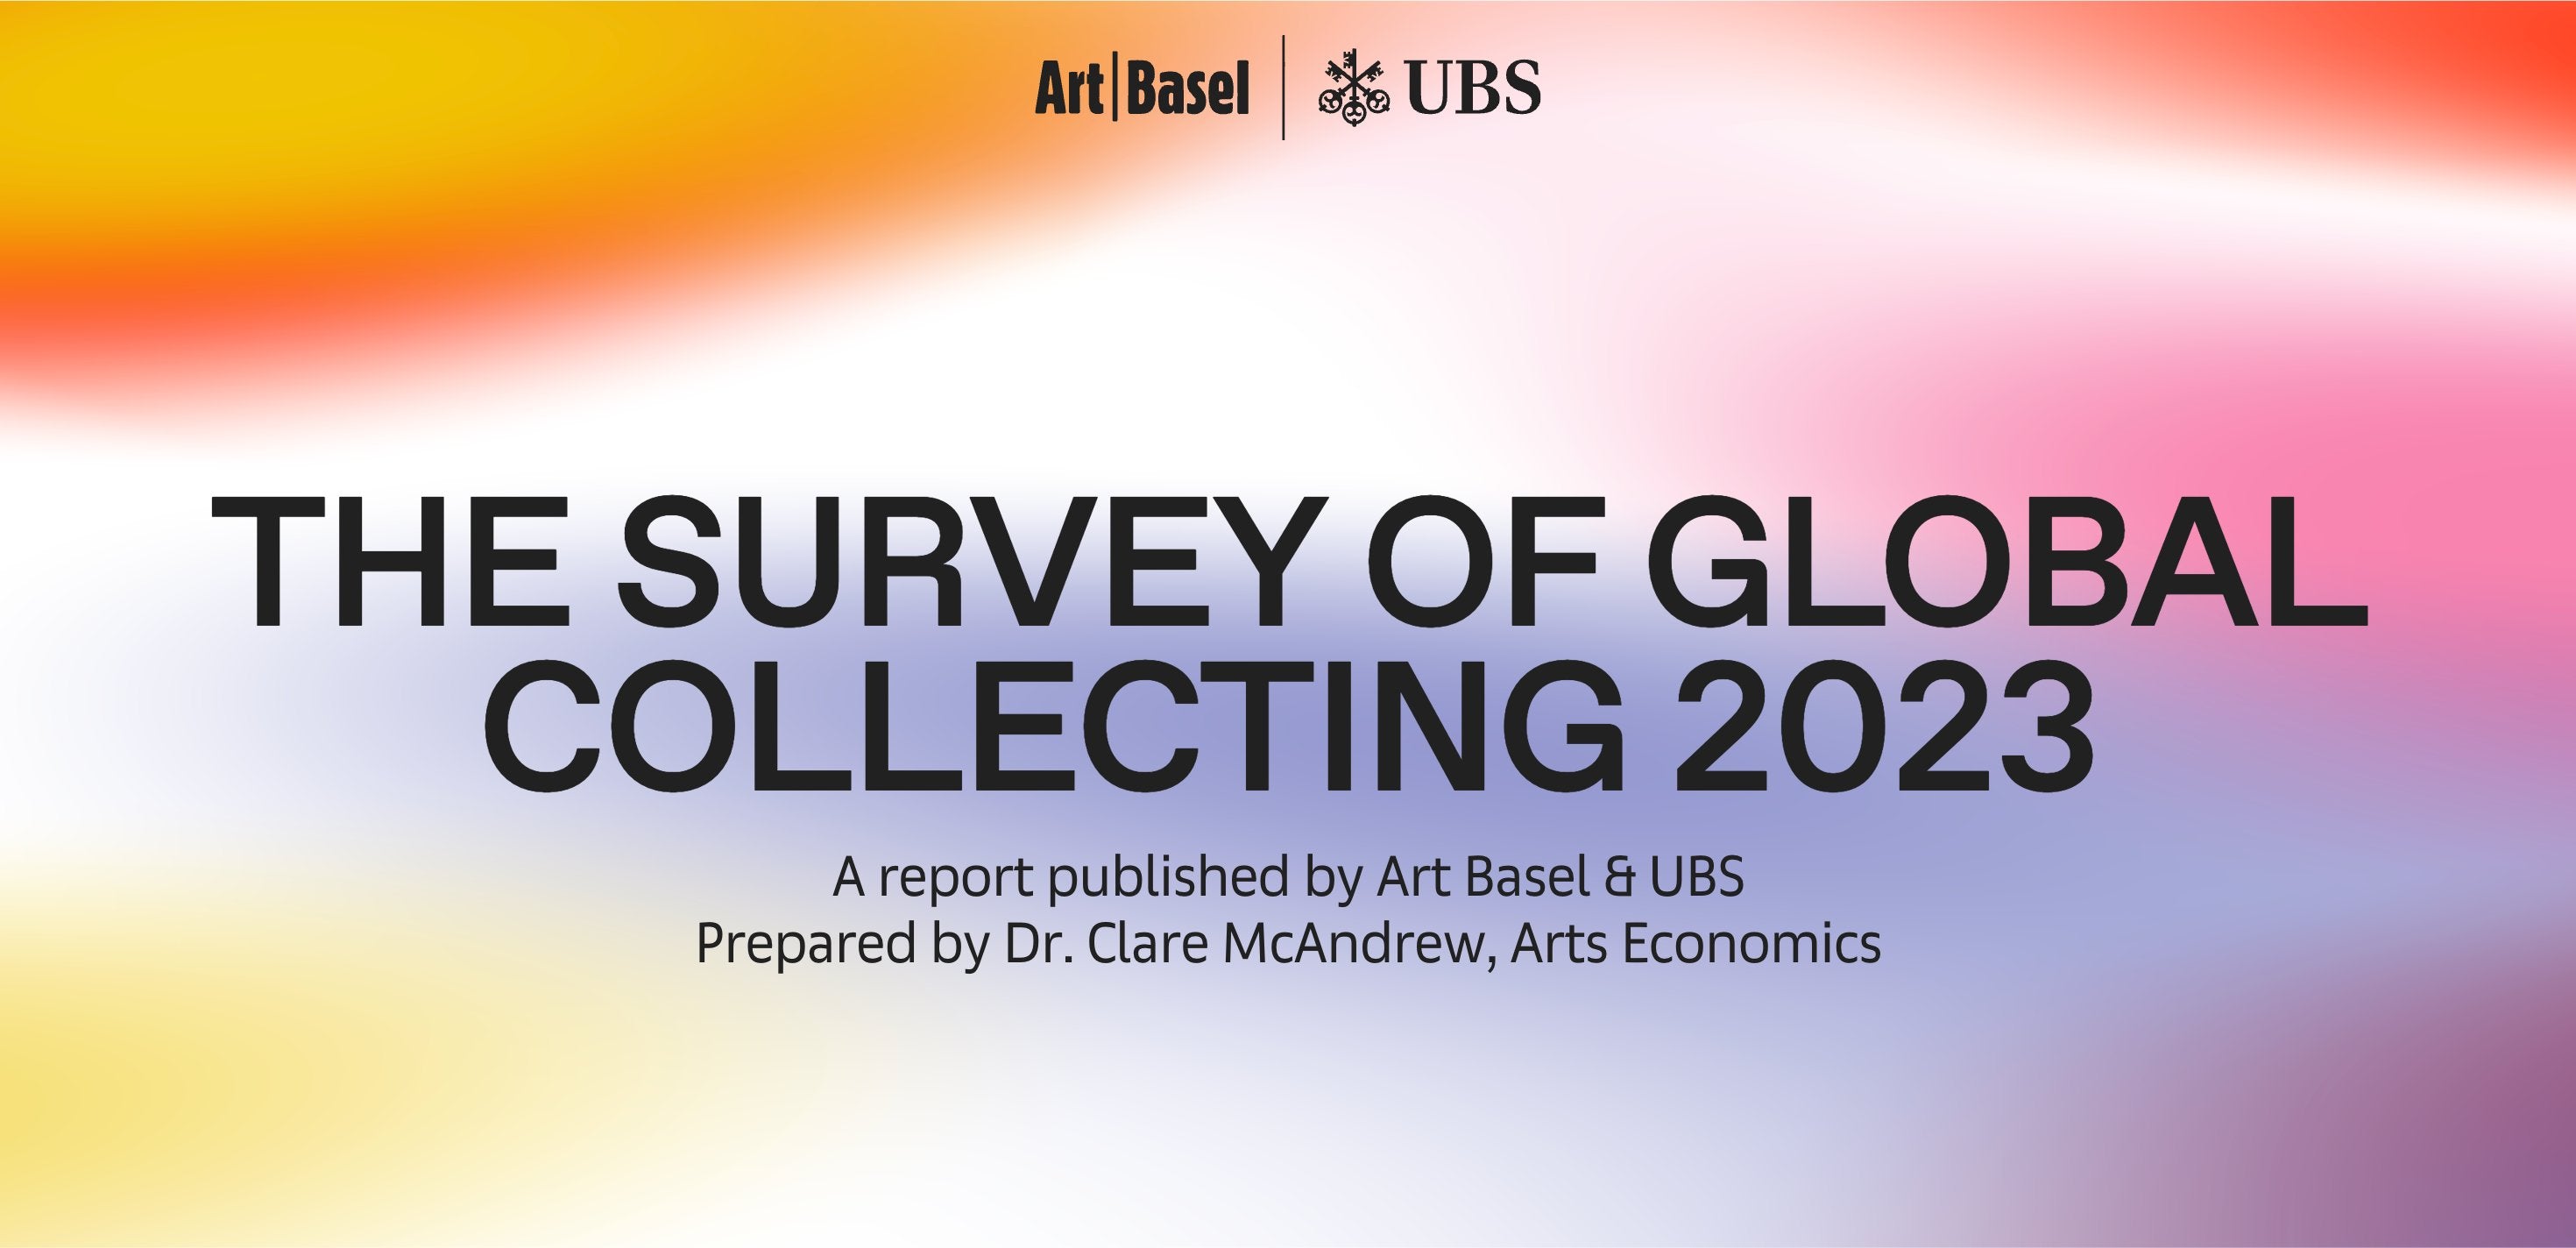 Resilience and Opportunity Amidst Global Economic Shifts. A Review of “The Art Basel and UBS Survey of Global Collecting in 2023